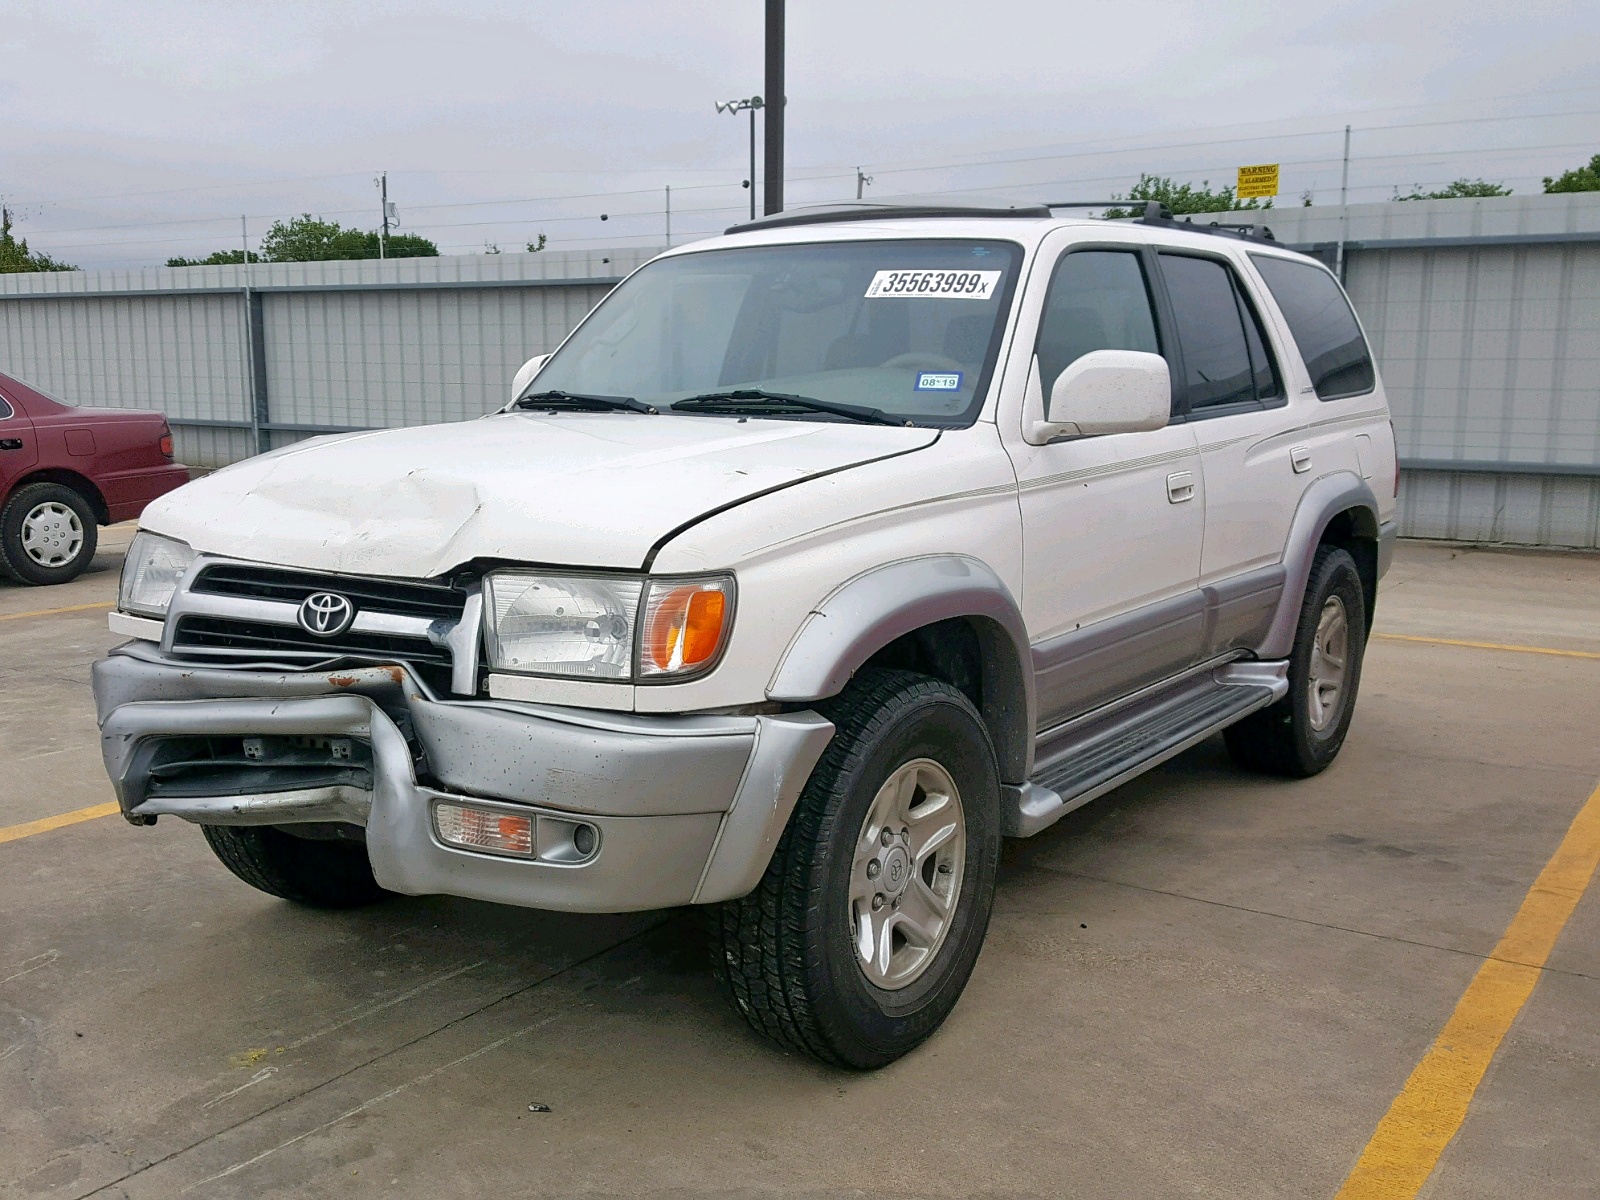 2000 Toyota 4runner Limited For Sale Tx Dallas South Thu Jun 06